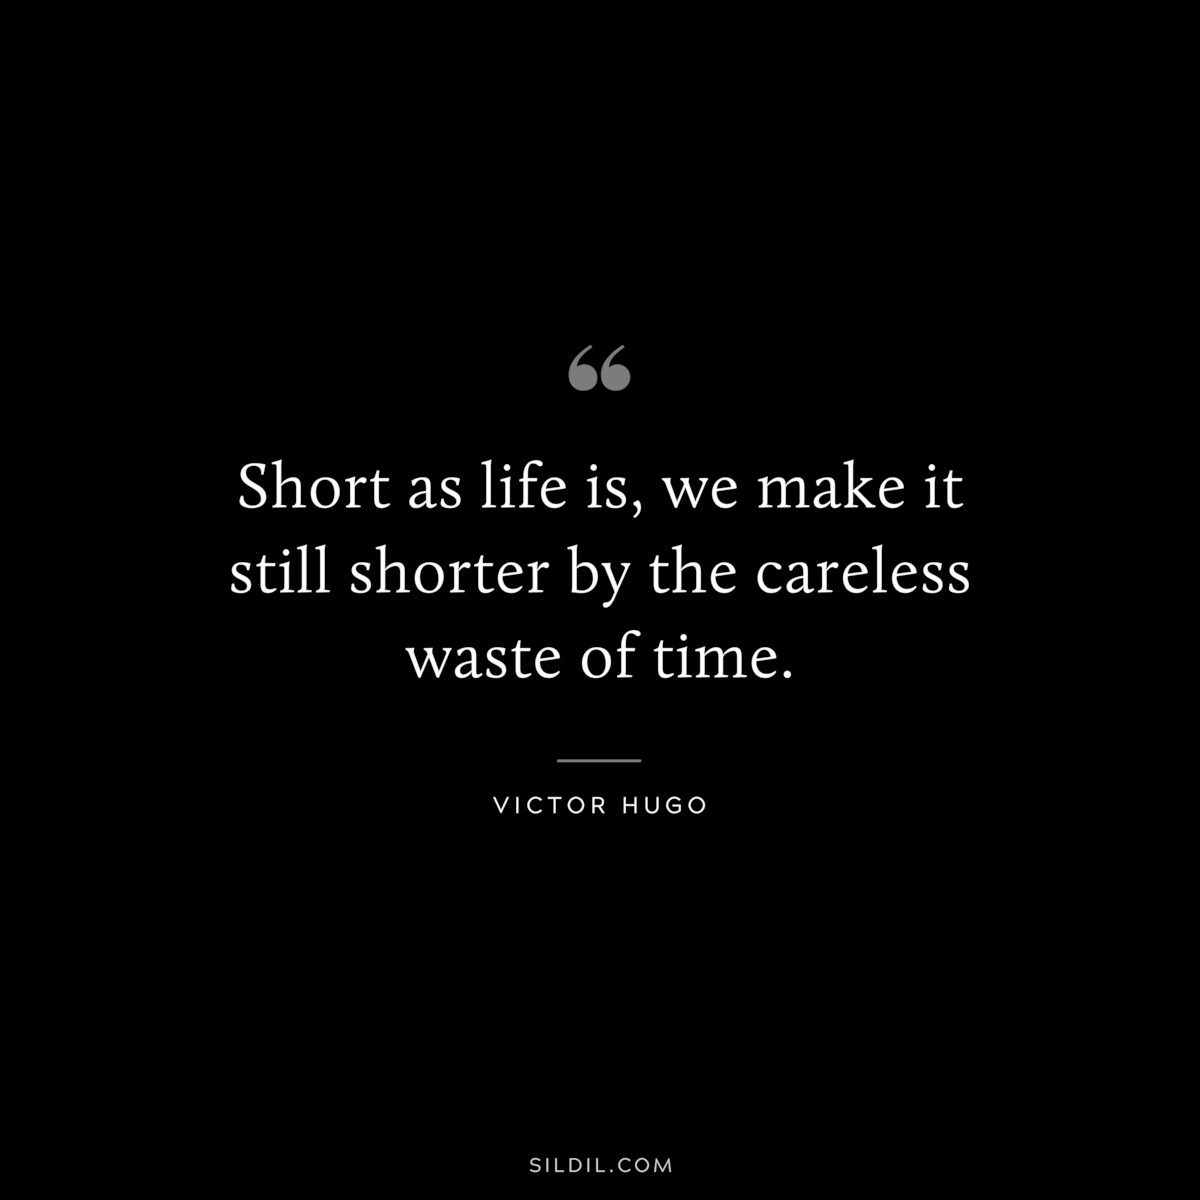 Short as life is, we make it still shorter by the careless waste of time.― Victor Hugo